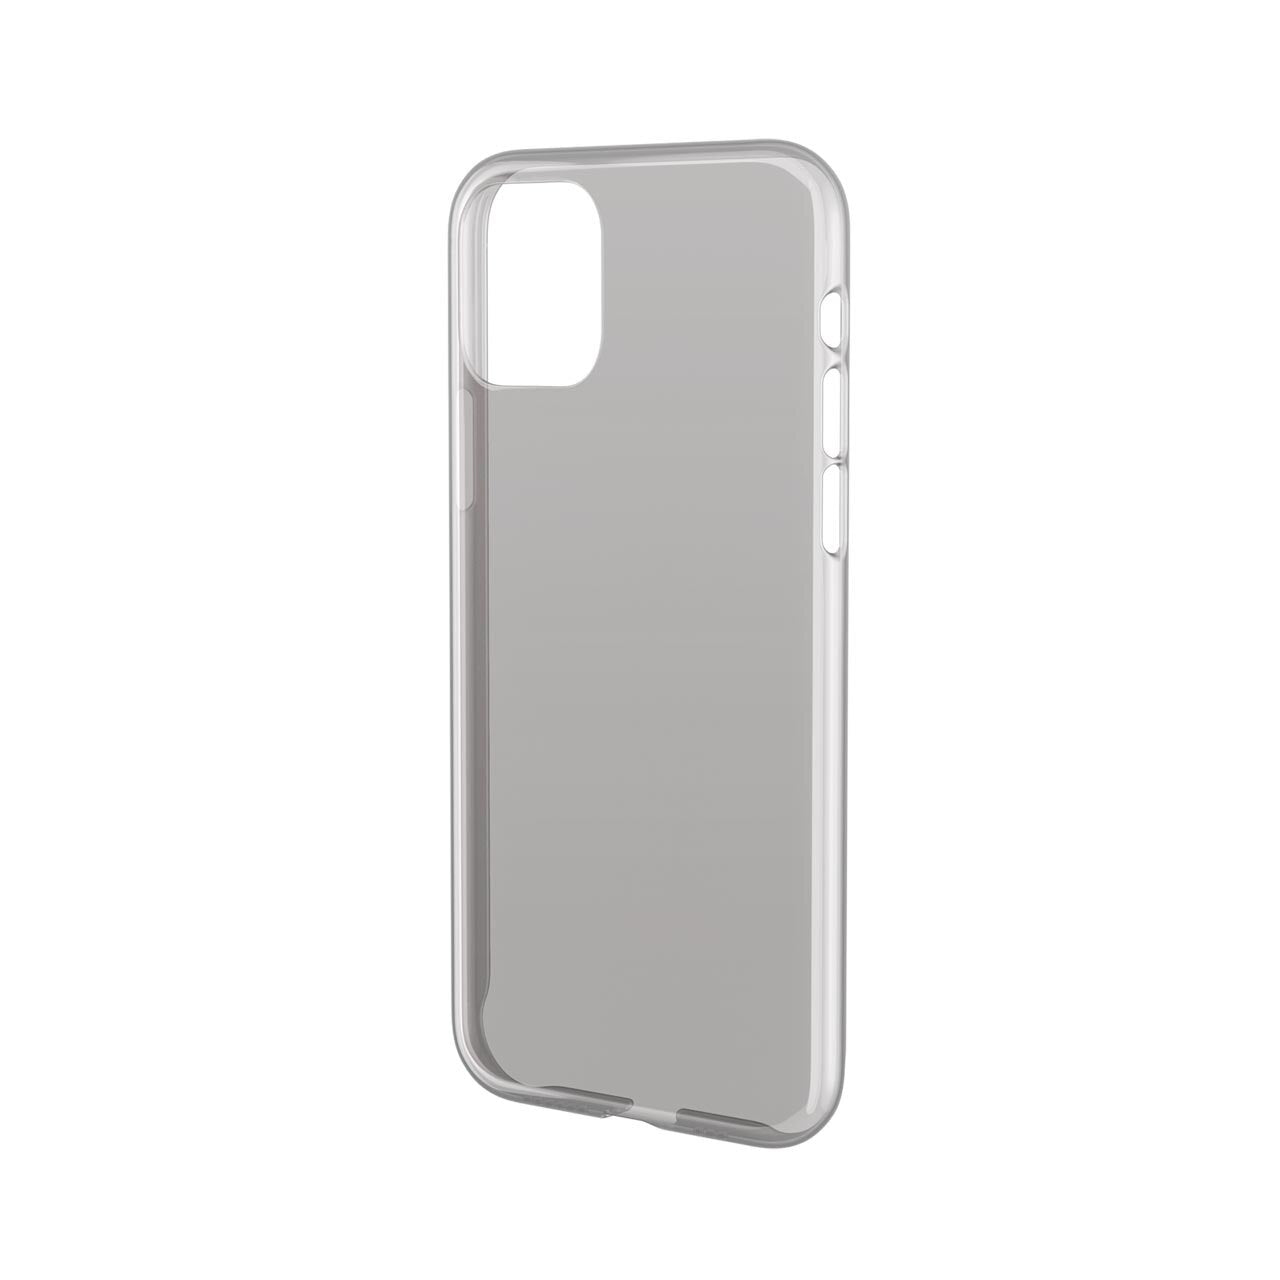 Air Jacket for iPhone 11 Pro - Clear Black